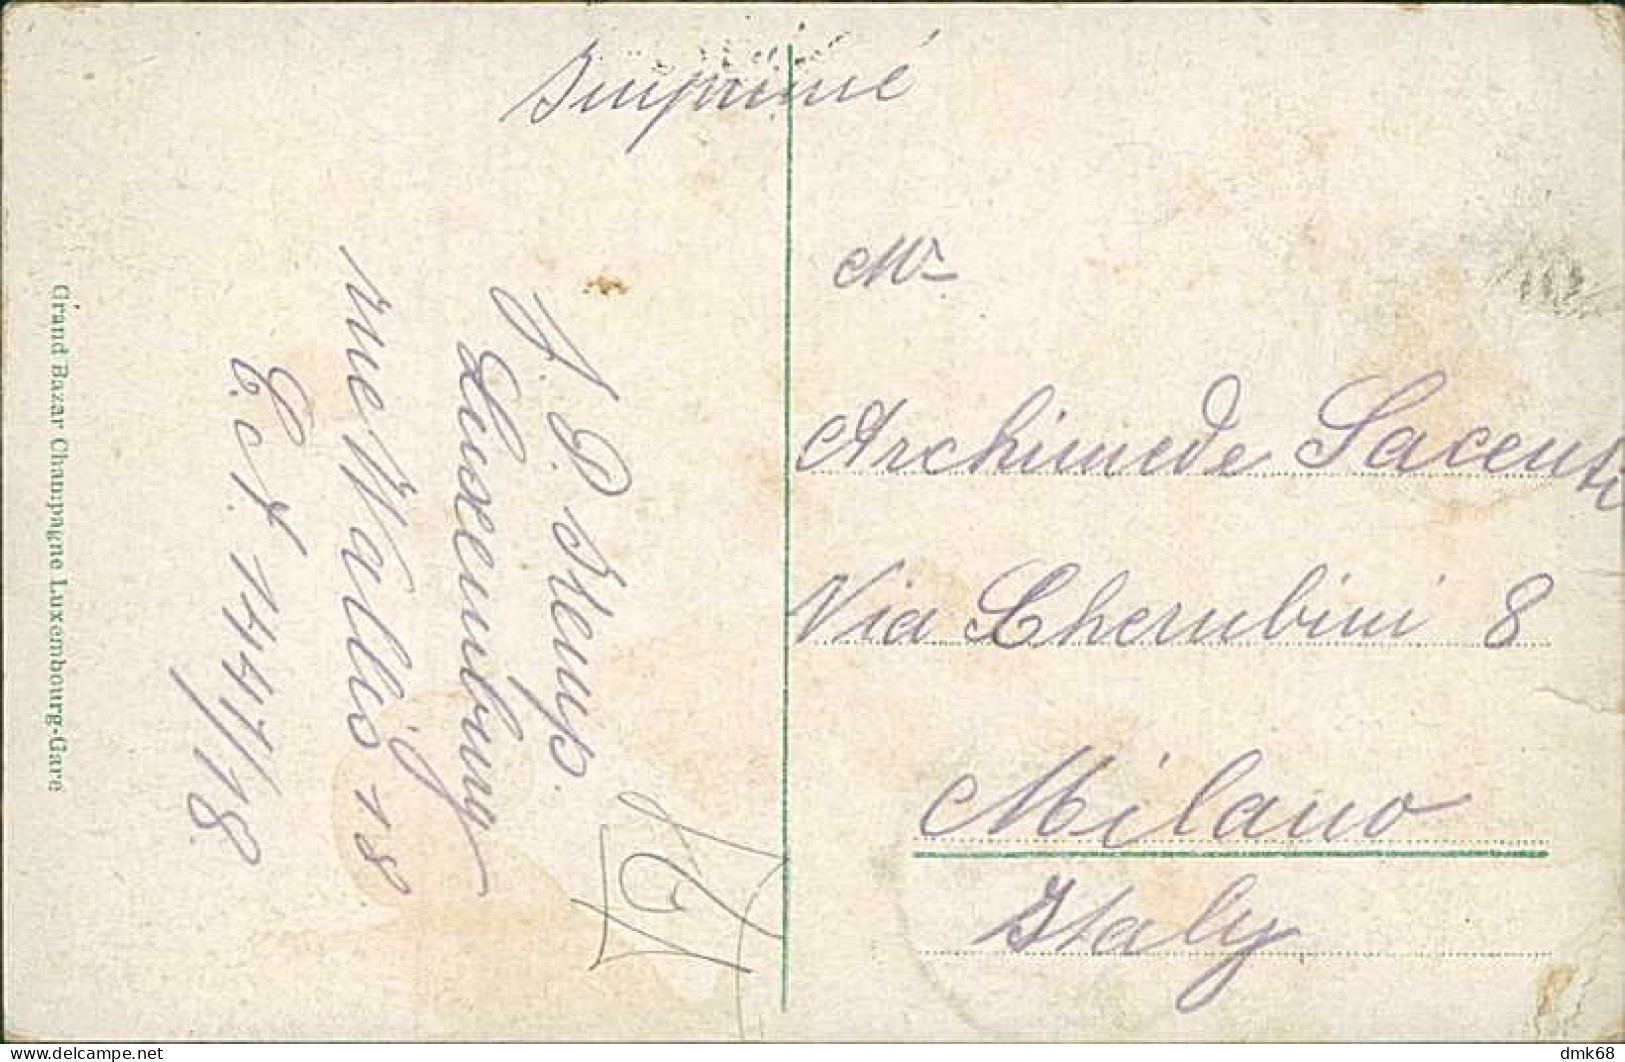 LUXEMBOURG - SIECHENGASS - ED. GRAND BAZAR CHAMPAGNE - MAILED 1922 (18016) - Luxembourg - Ville